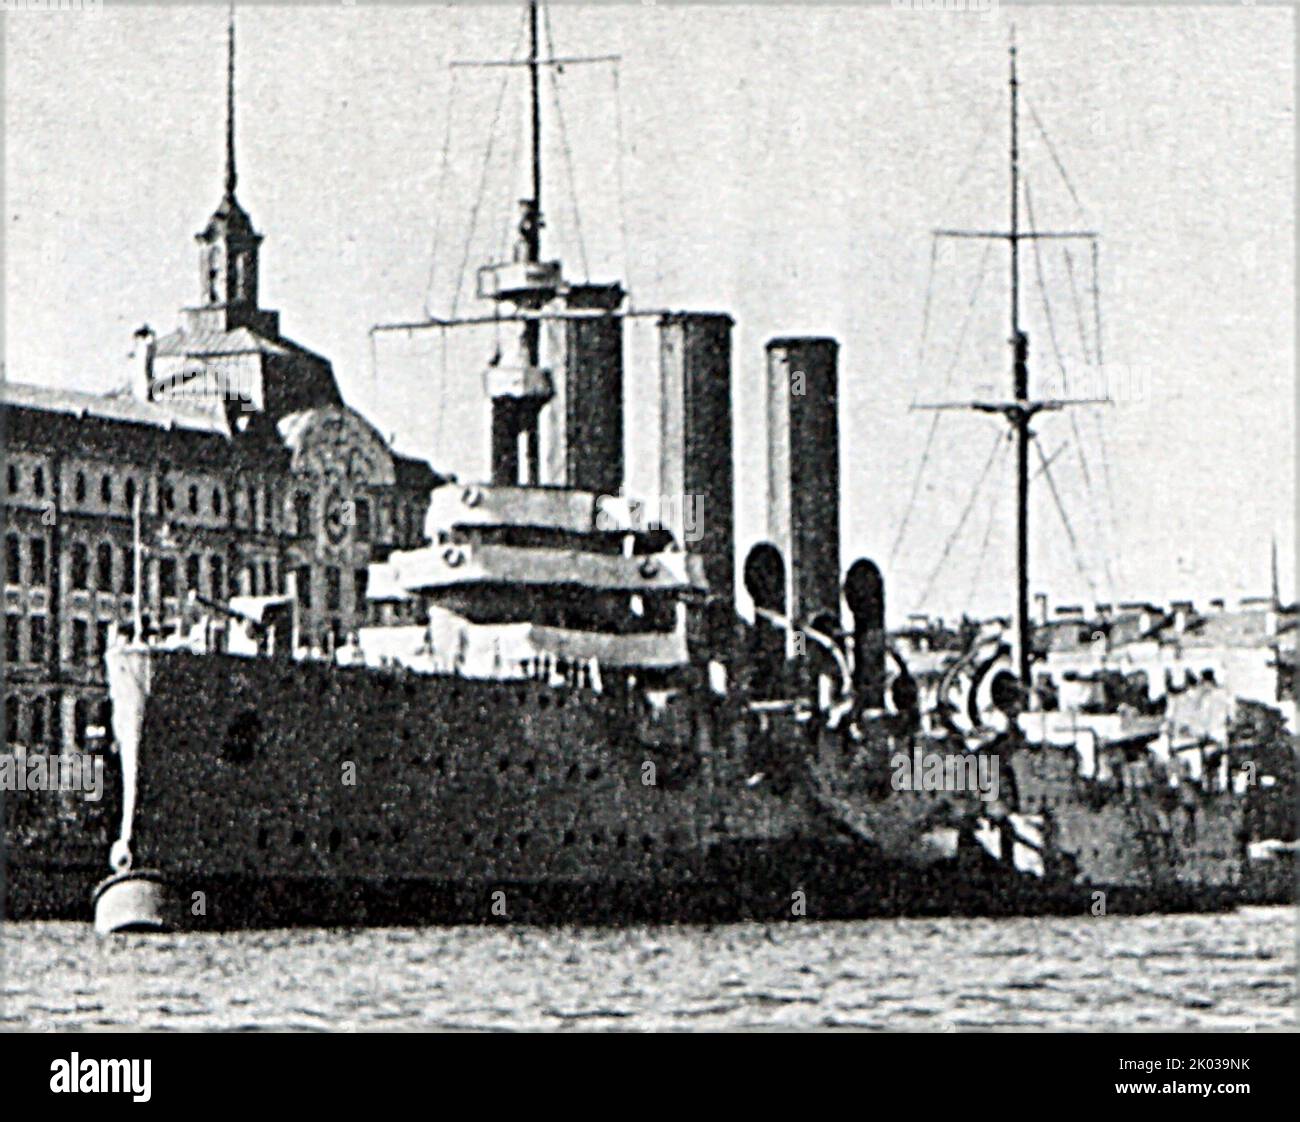 Russian battleship Aurora during the October Revolution of 1917. The crew joined the February Revolution of 1917. On October 25, 1917, at 9:40 pm, a blank shot from her guns was the signal for the start of the storming of the Winter Palace, which was to be the beginning of the October Revolution. Stock Photo